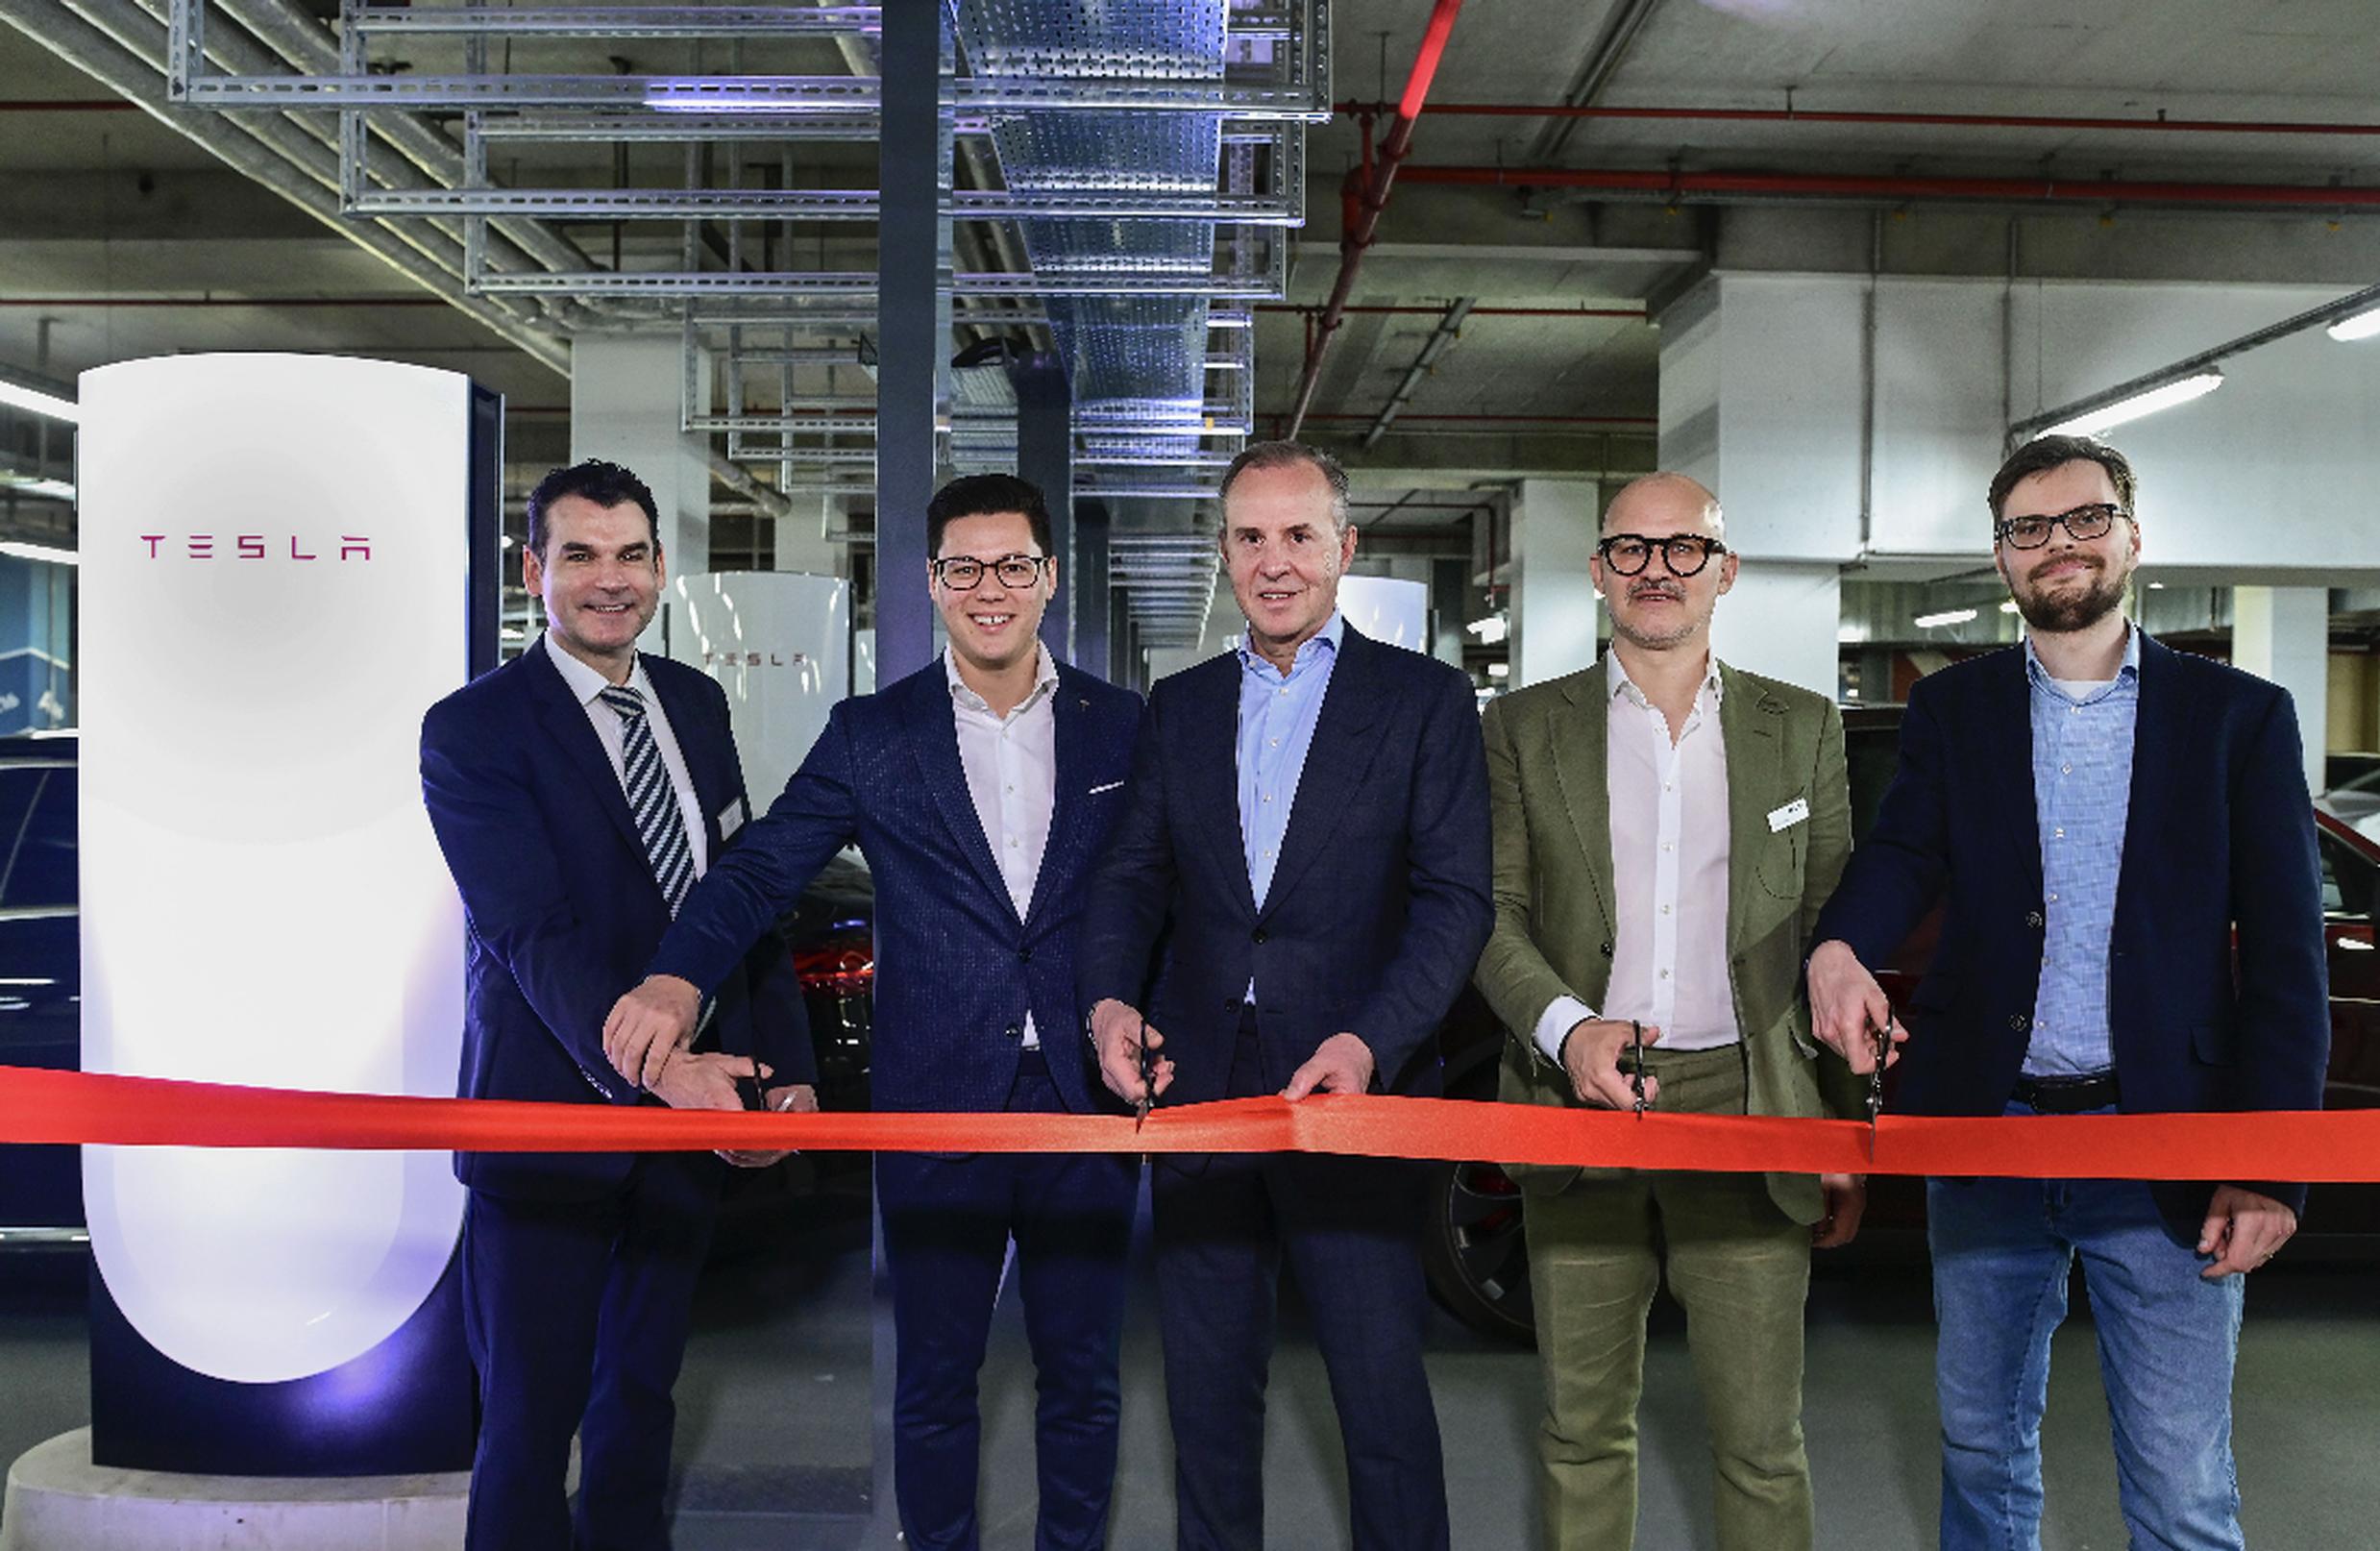 A Tesla fast-charging is being built in the APCOA multi-storey car park at Berlin`s ALEXA shopping centre: (L-R) Oliver Hanna, centre manager, Malte Kendel, manager charging, Tesla, Philippe Op de Beeck, CEO, APCOA, Niels Christ, group director for urban hubs, APCOA and Martin Sölle, senior project manager innovation, Berlin Agency for Electromobility (eMO)